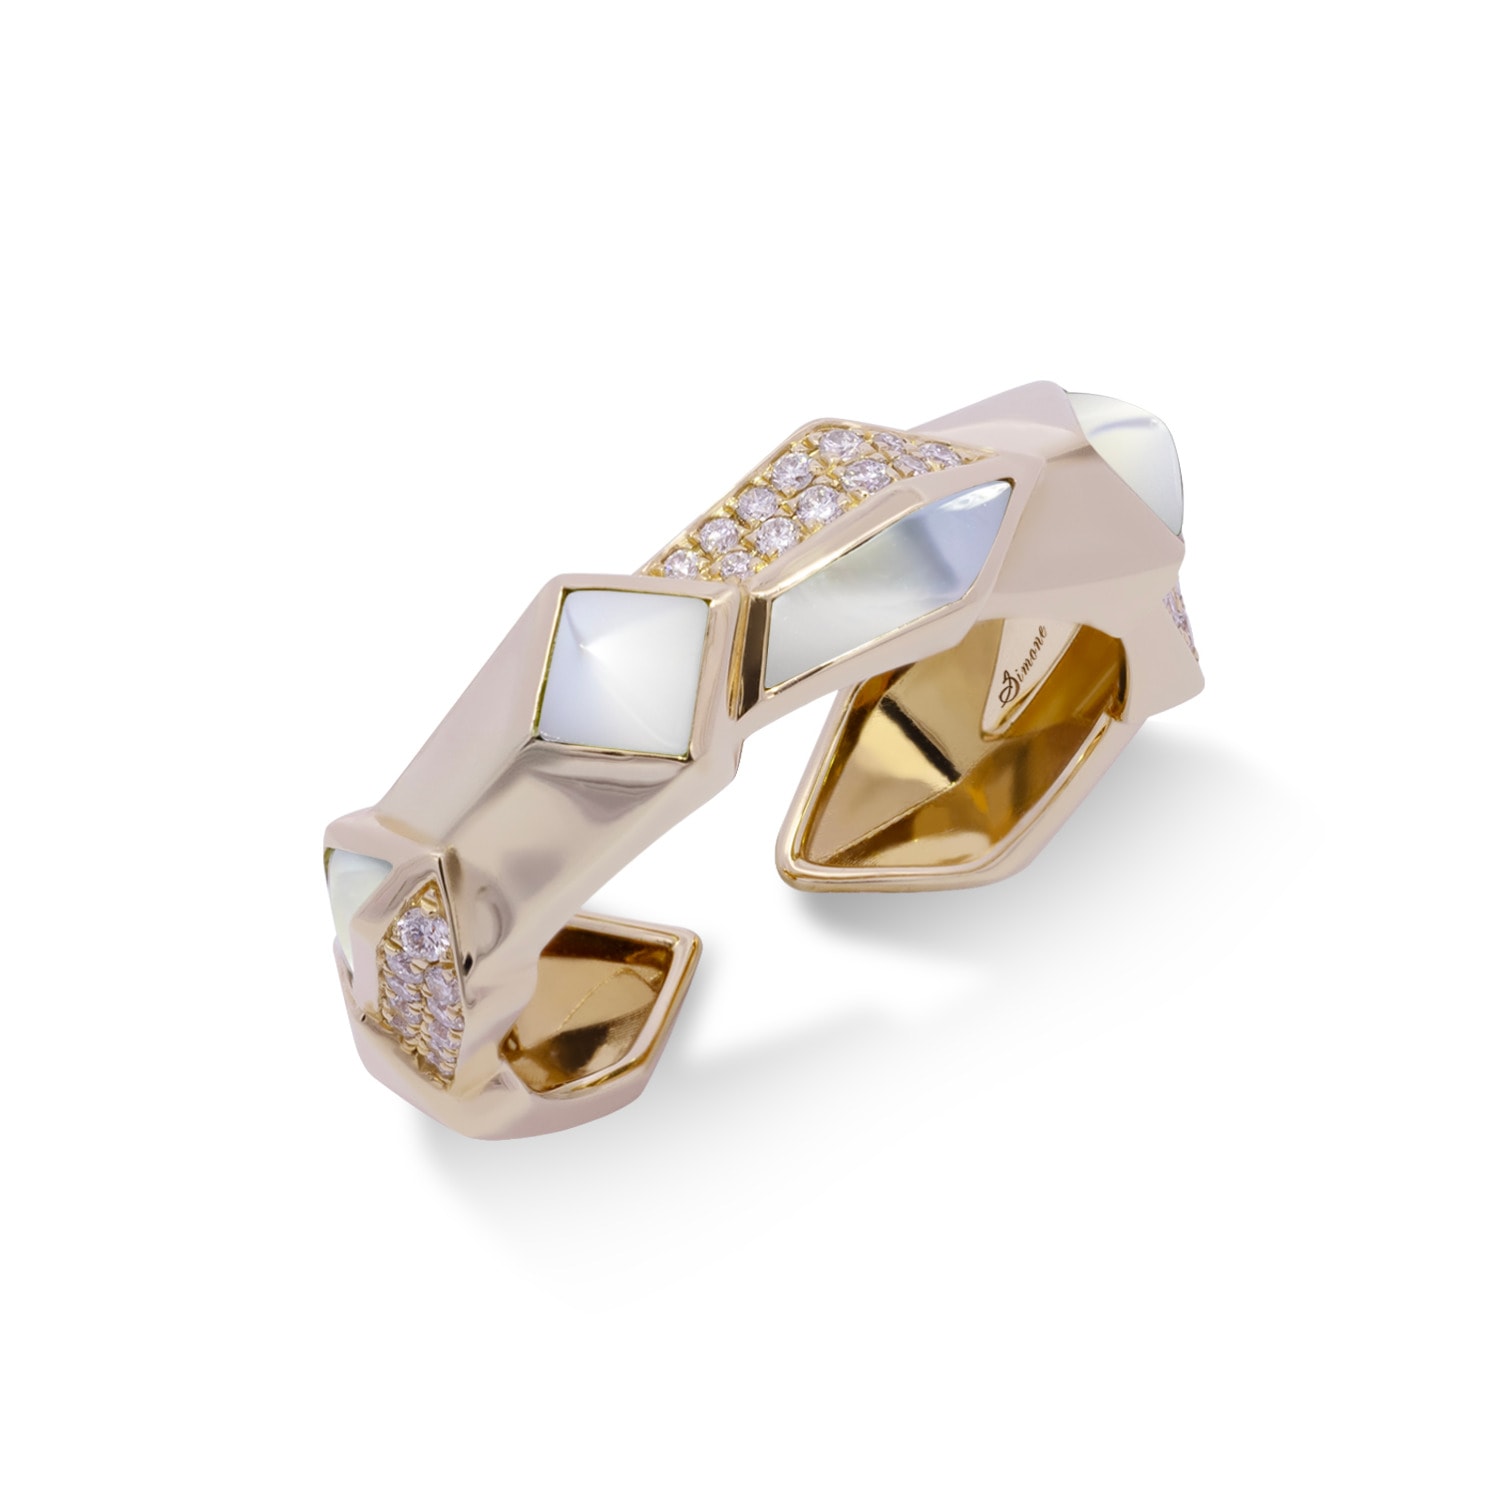 Women’s Rose Gold / White Edgy Unisex Ring In Solid Rose Gold, Diamonds, And White Mother-Of-Pearl Simone Jewels